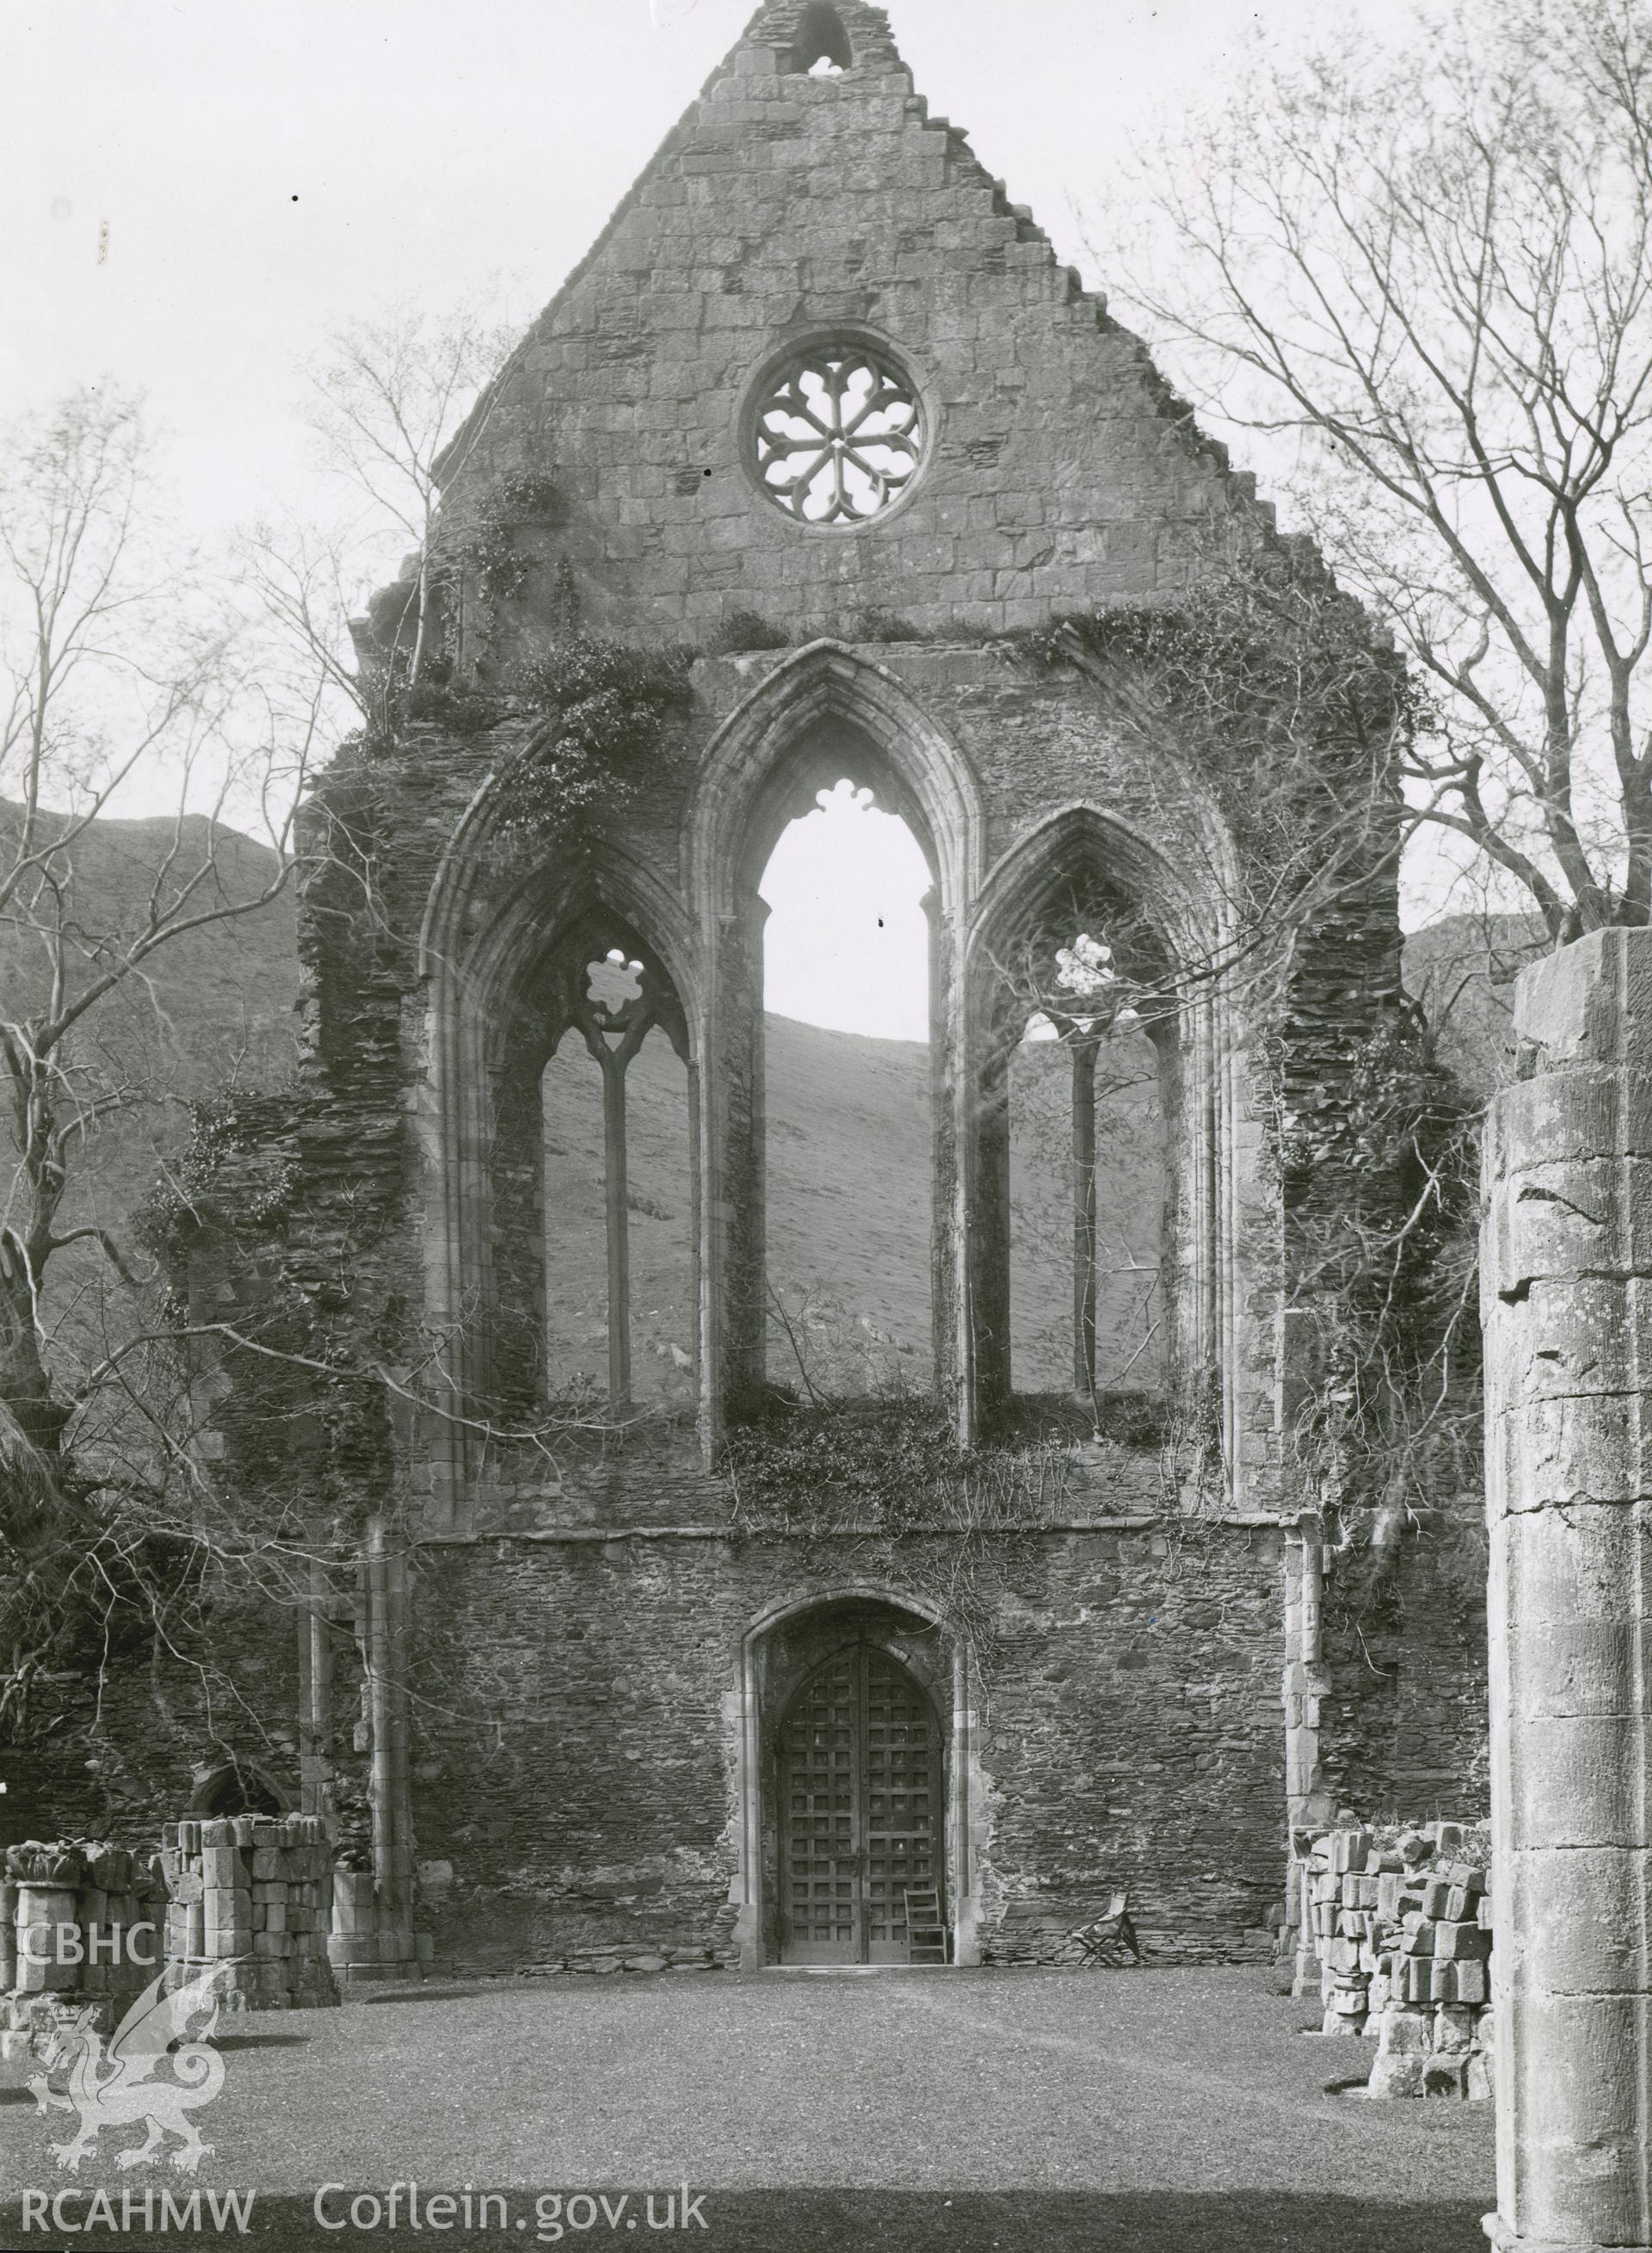 Digitised copy of a black and white photograph showing church interior at Valle Crucis Abbey looking west, taken by F.H. Crossley, 1949. Copied from print as negative held by NMR England (Historic England).